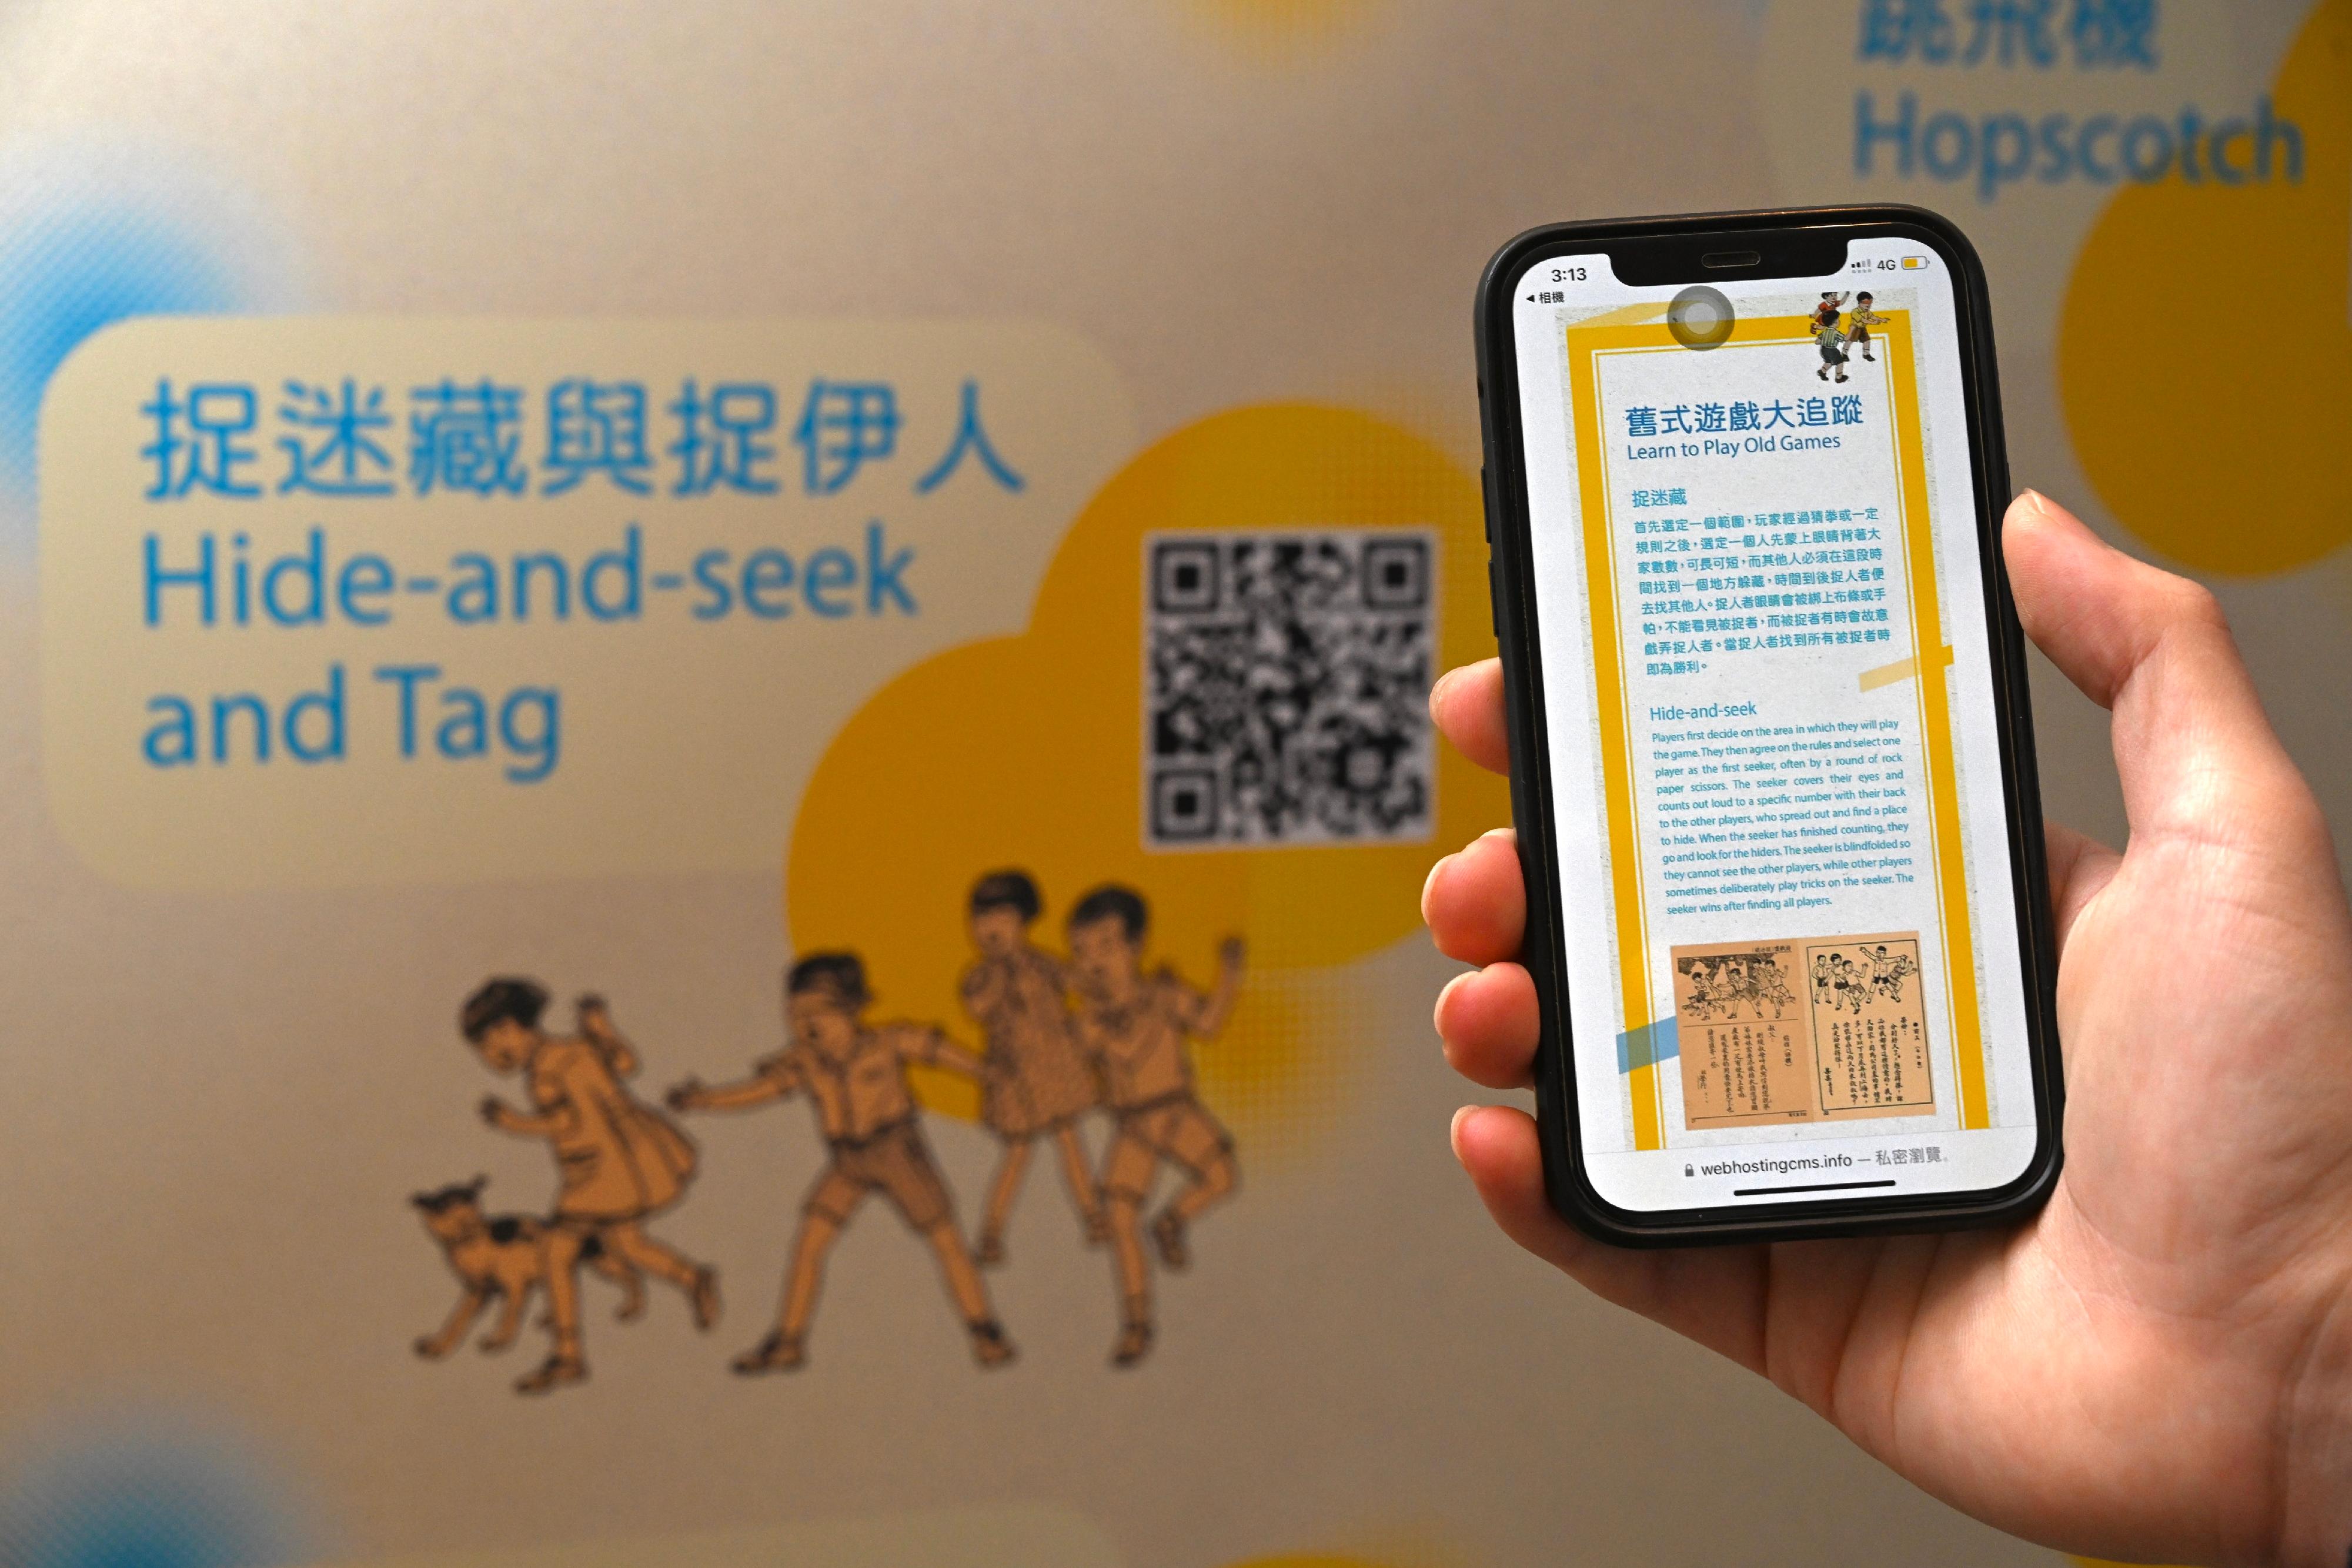 The Dr Sun Yat-sen Museum will launch a new special exhibition, "Learning through play: Old textbooks, toys and games" tomorrow (December 22). Visitors can obtain information and learn about the games and toys in the early to mid-20th century by scanning the QR codes at the gallery.